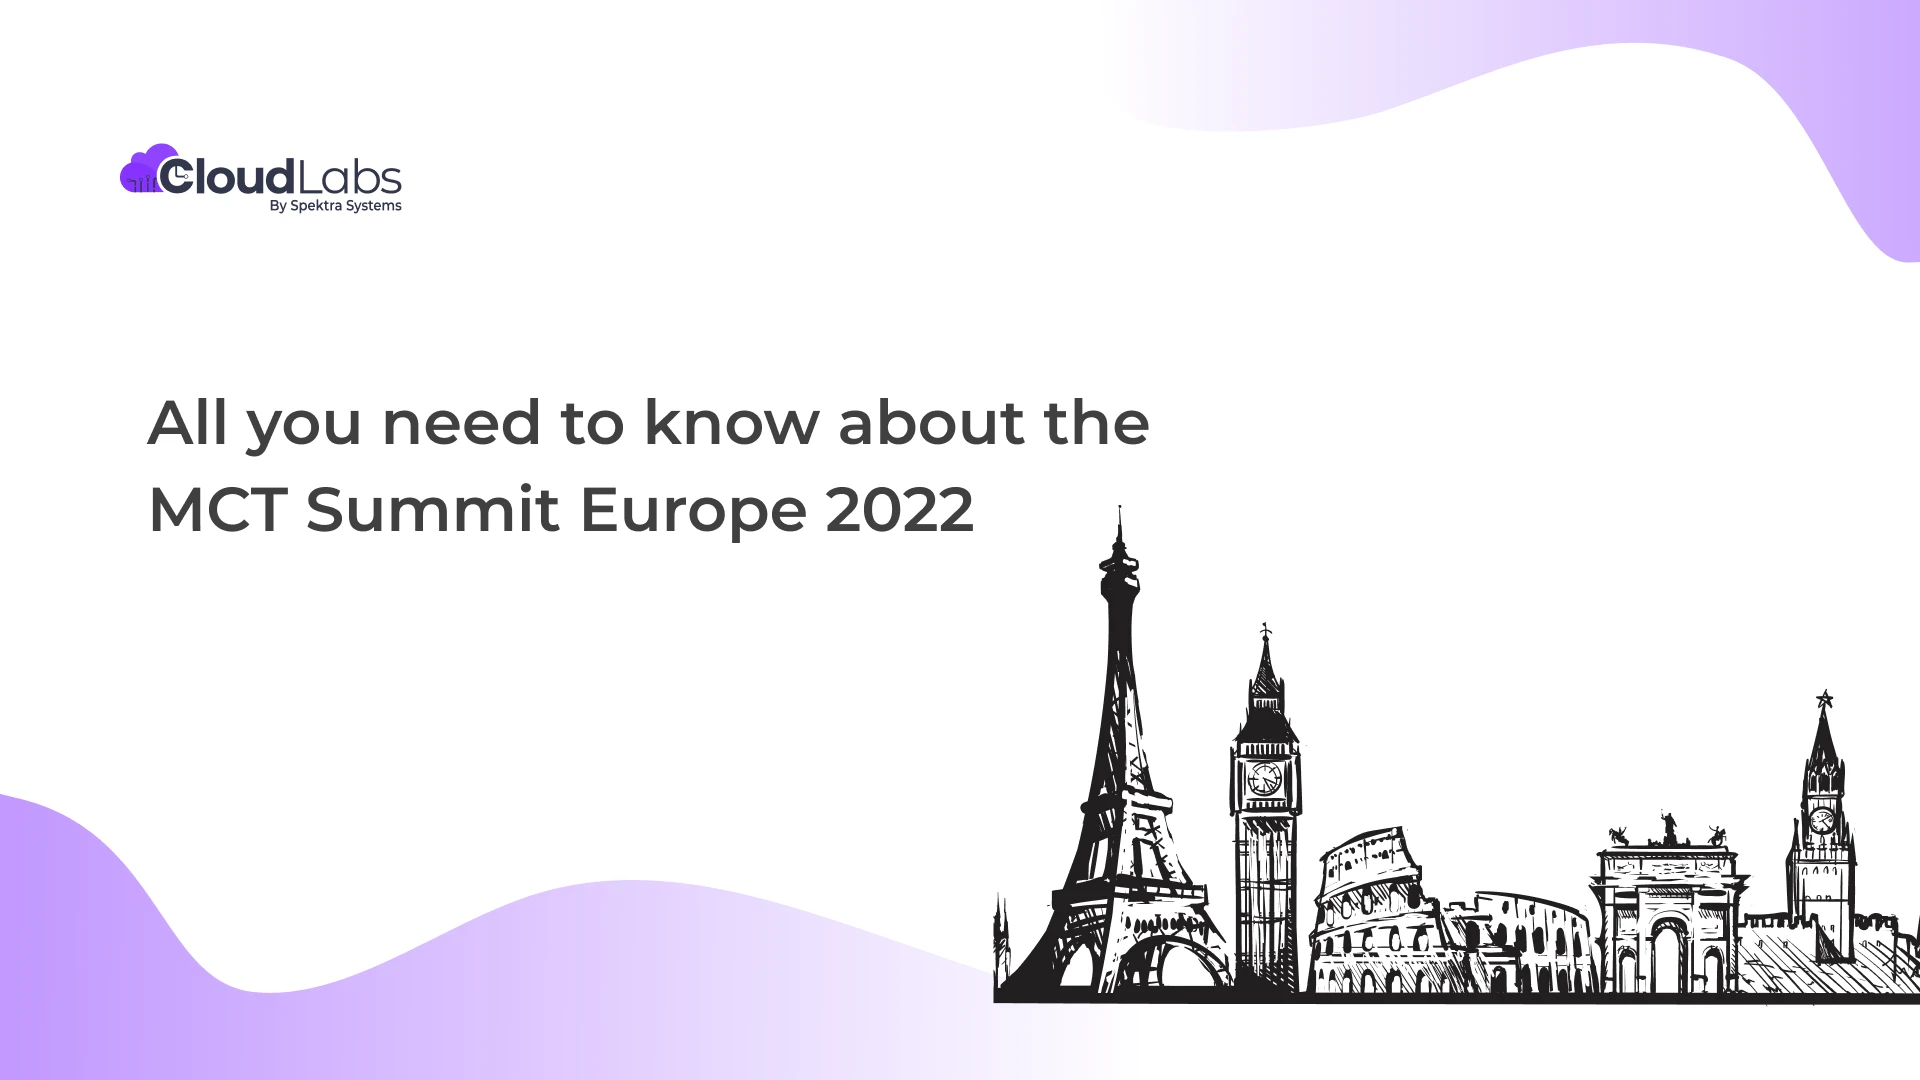 All you need to know about the MCT Summit Europe 2022